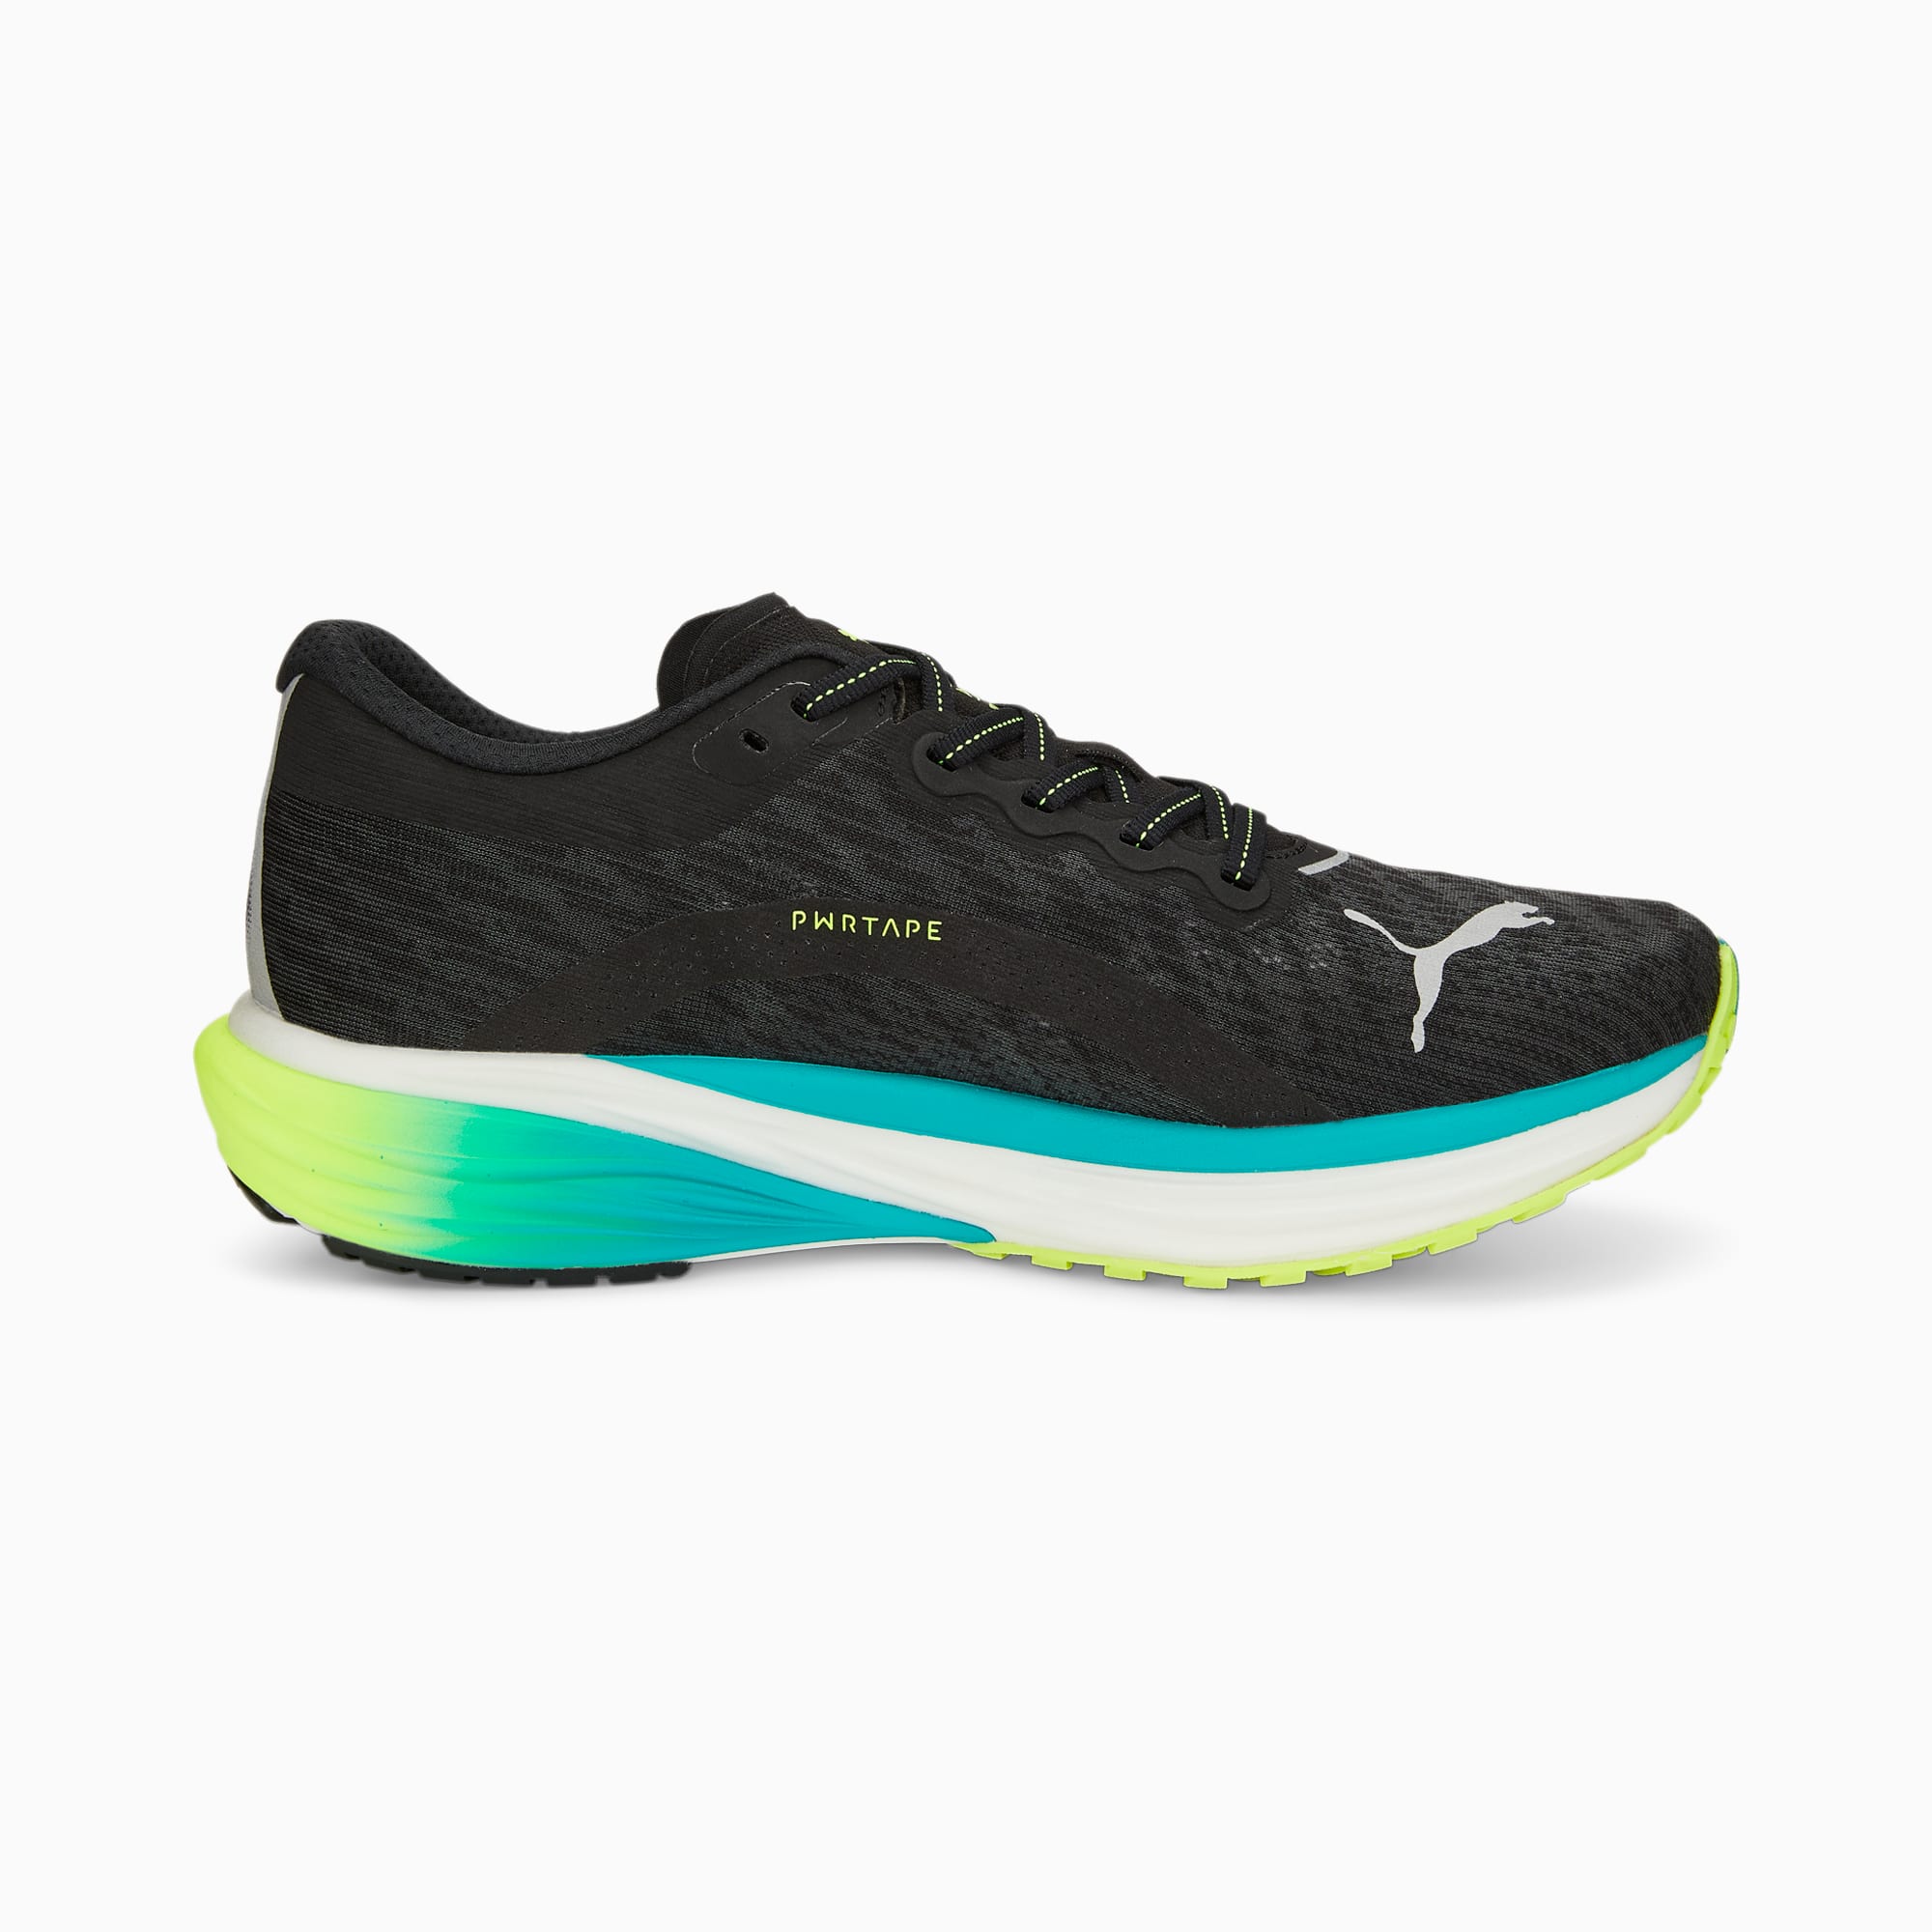 PUMA Deviate NITRO 2 awarded with Runner's World Editor's Choice Gold Medal  for the second year in a row - PUMA CATch up